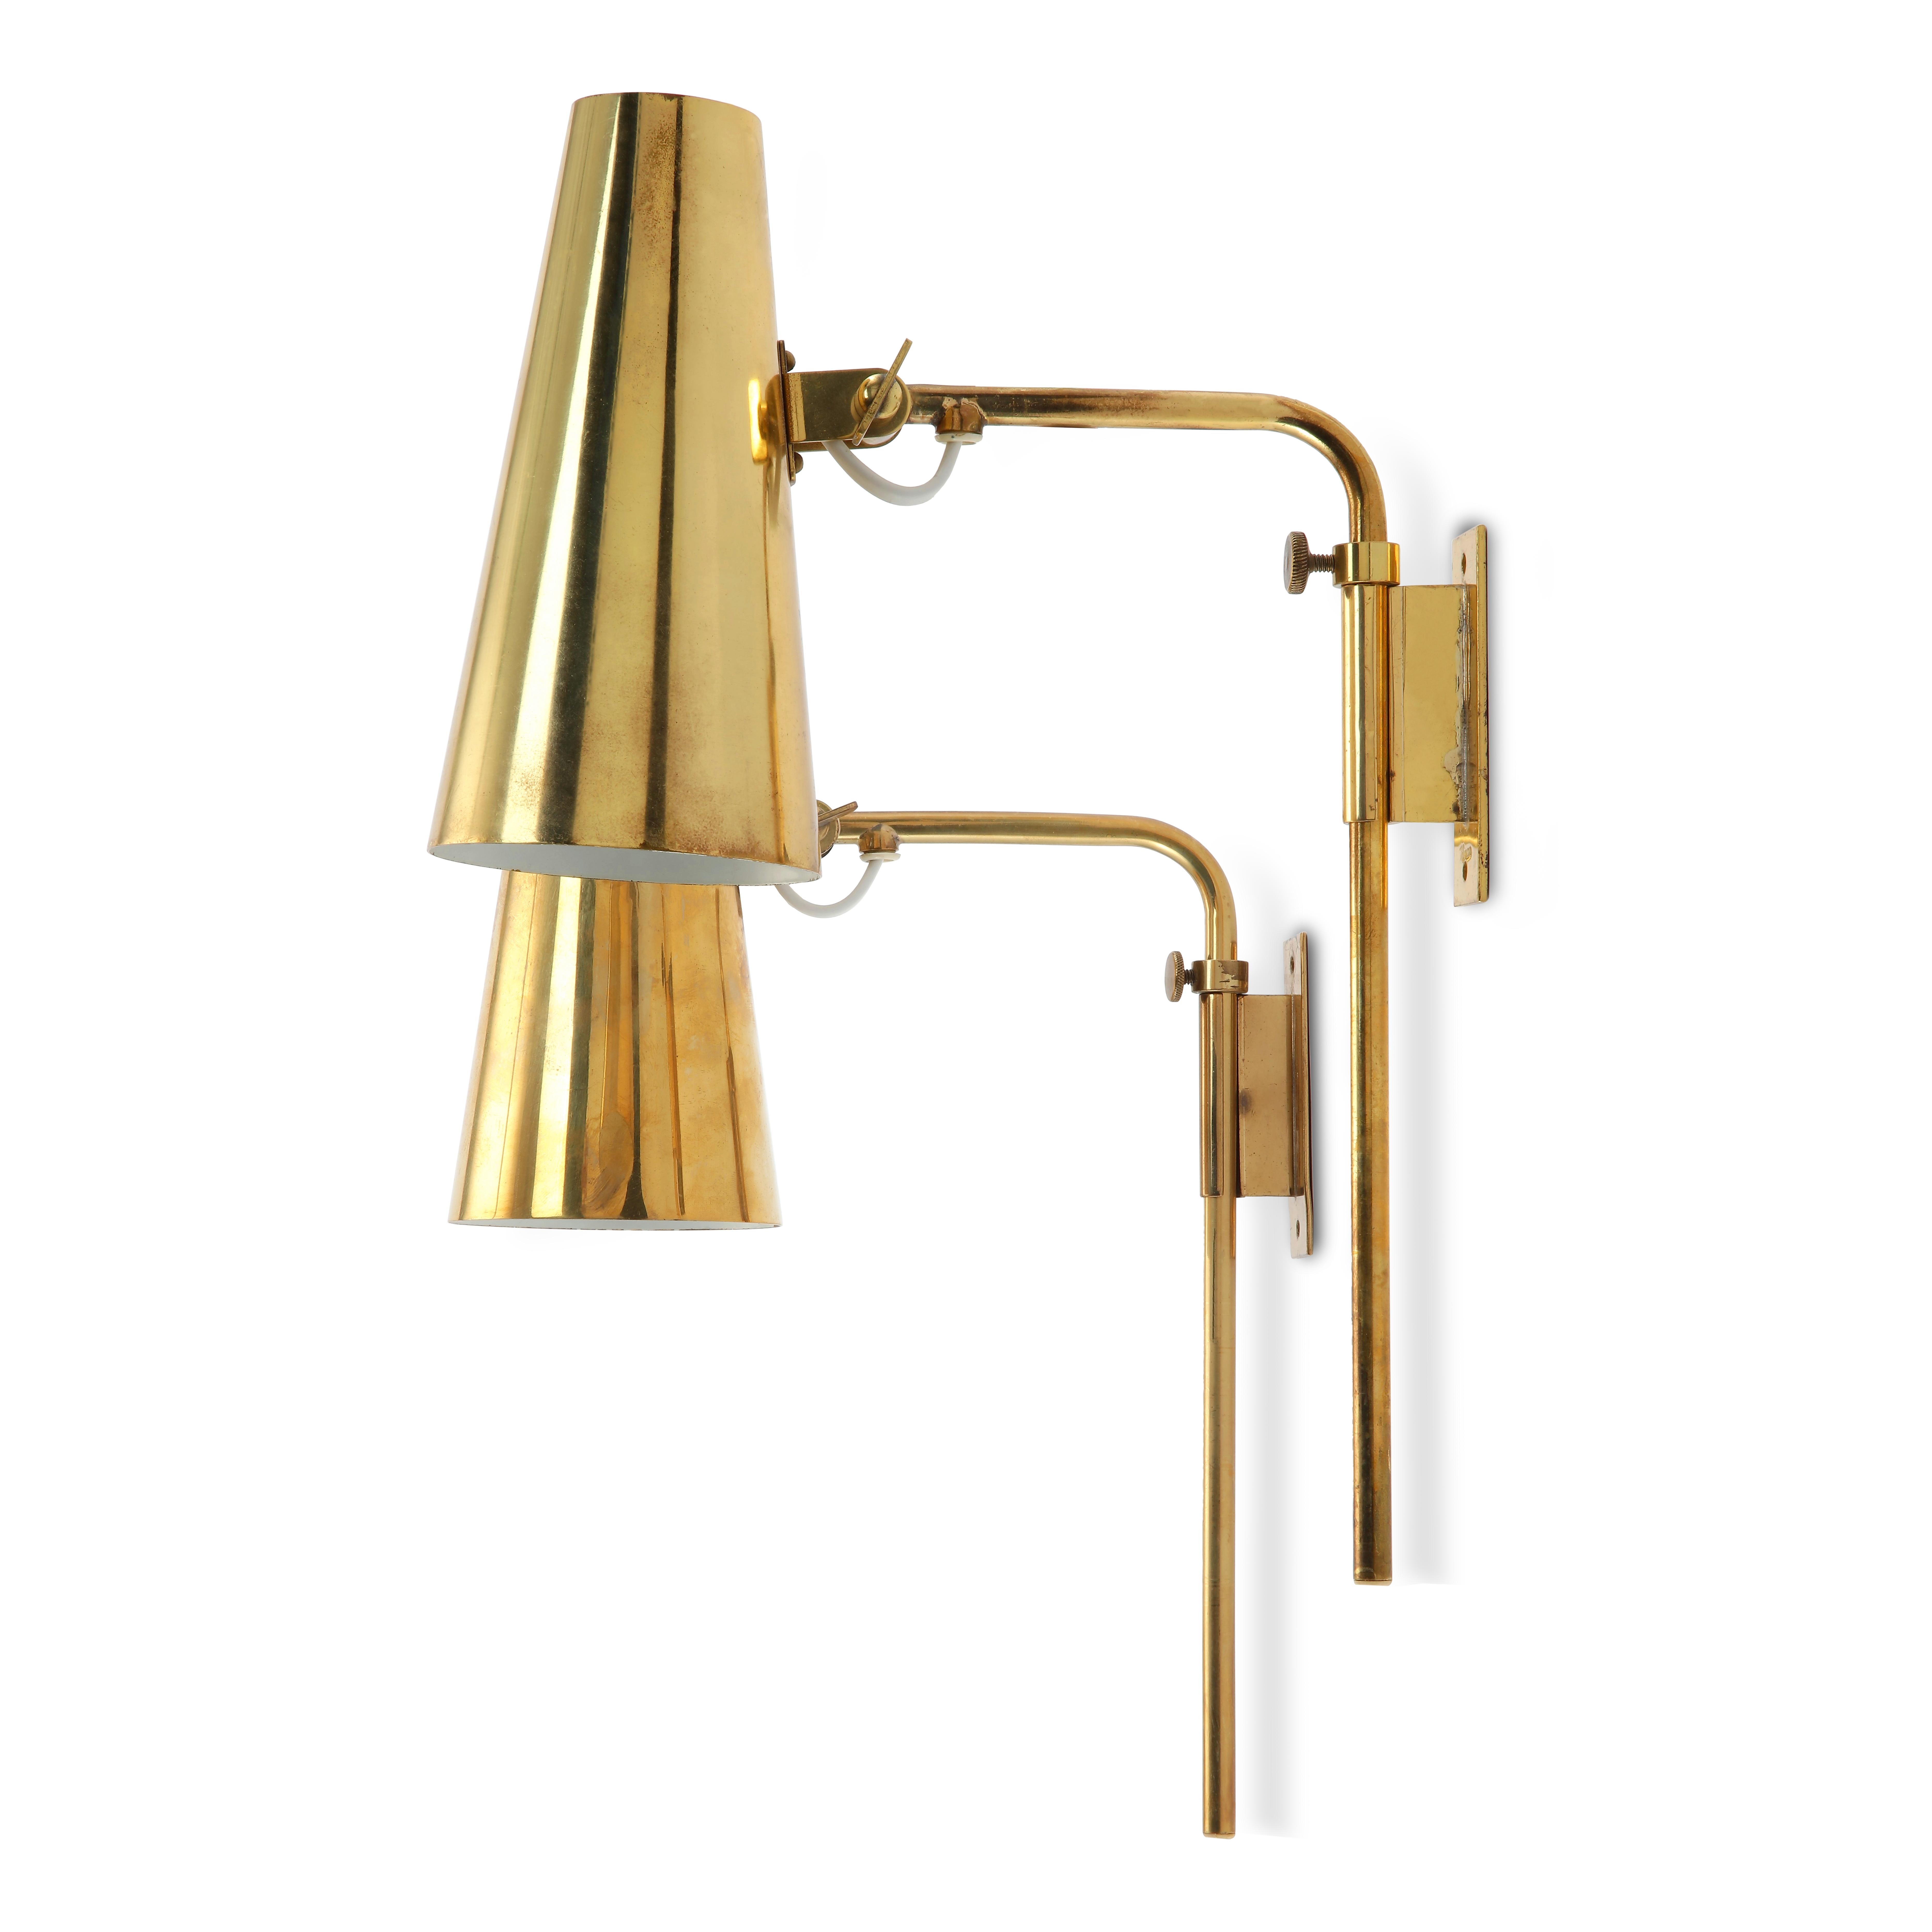 Finnish Pair of Rare Brass Paavo Tynell Wall Lights for Taito Oy, Finland, 1950s For Sale